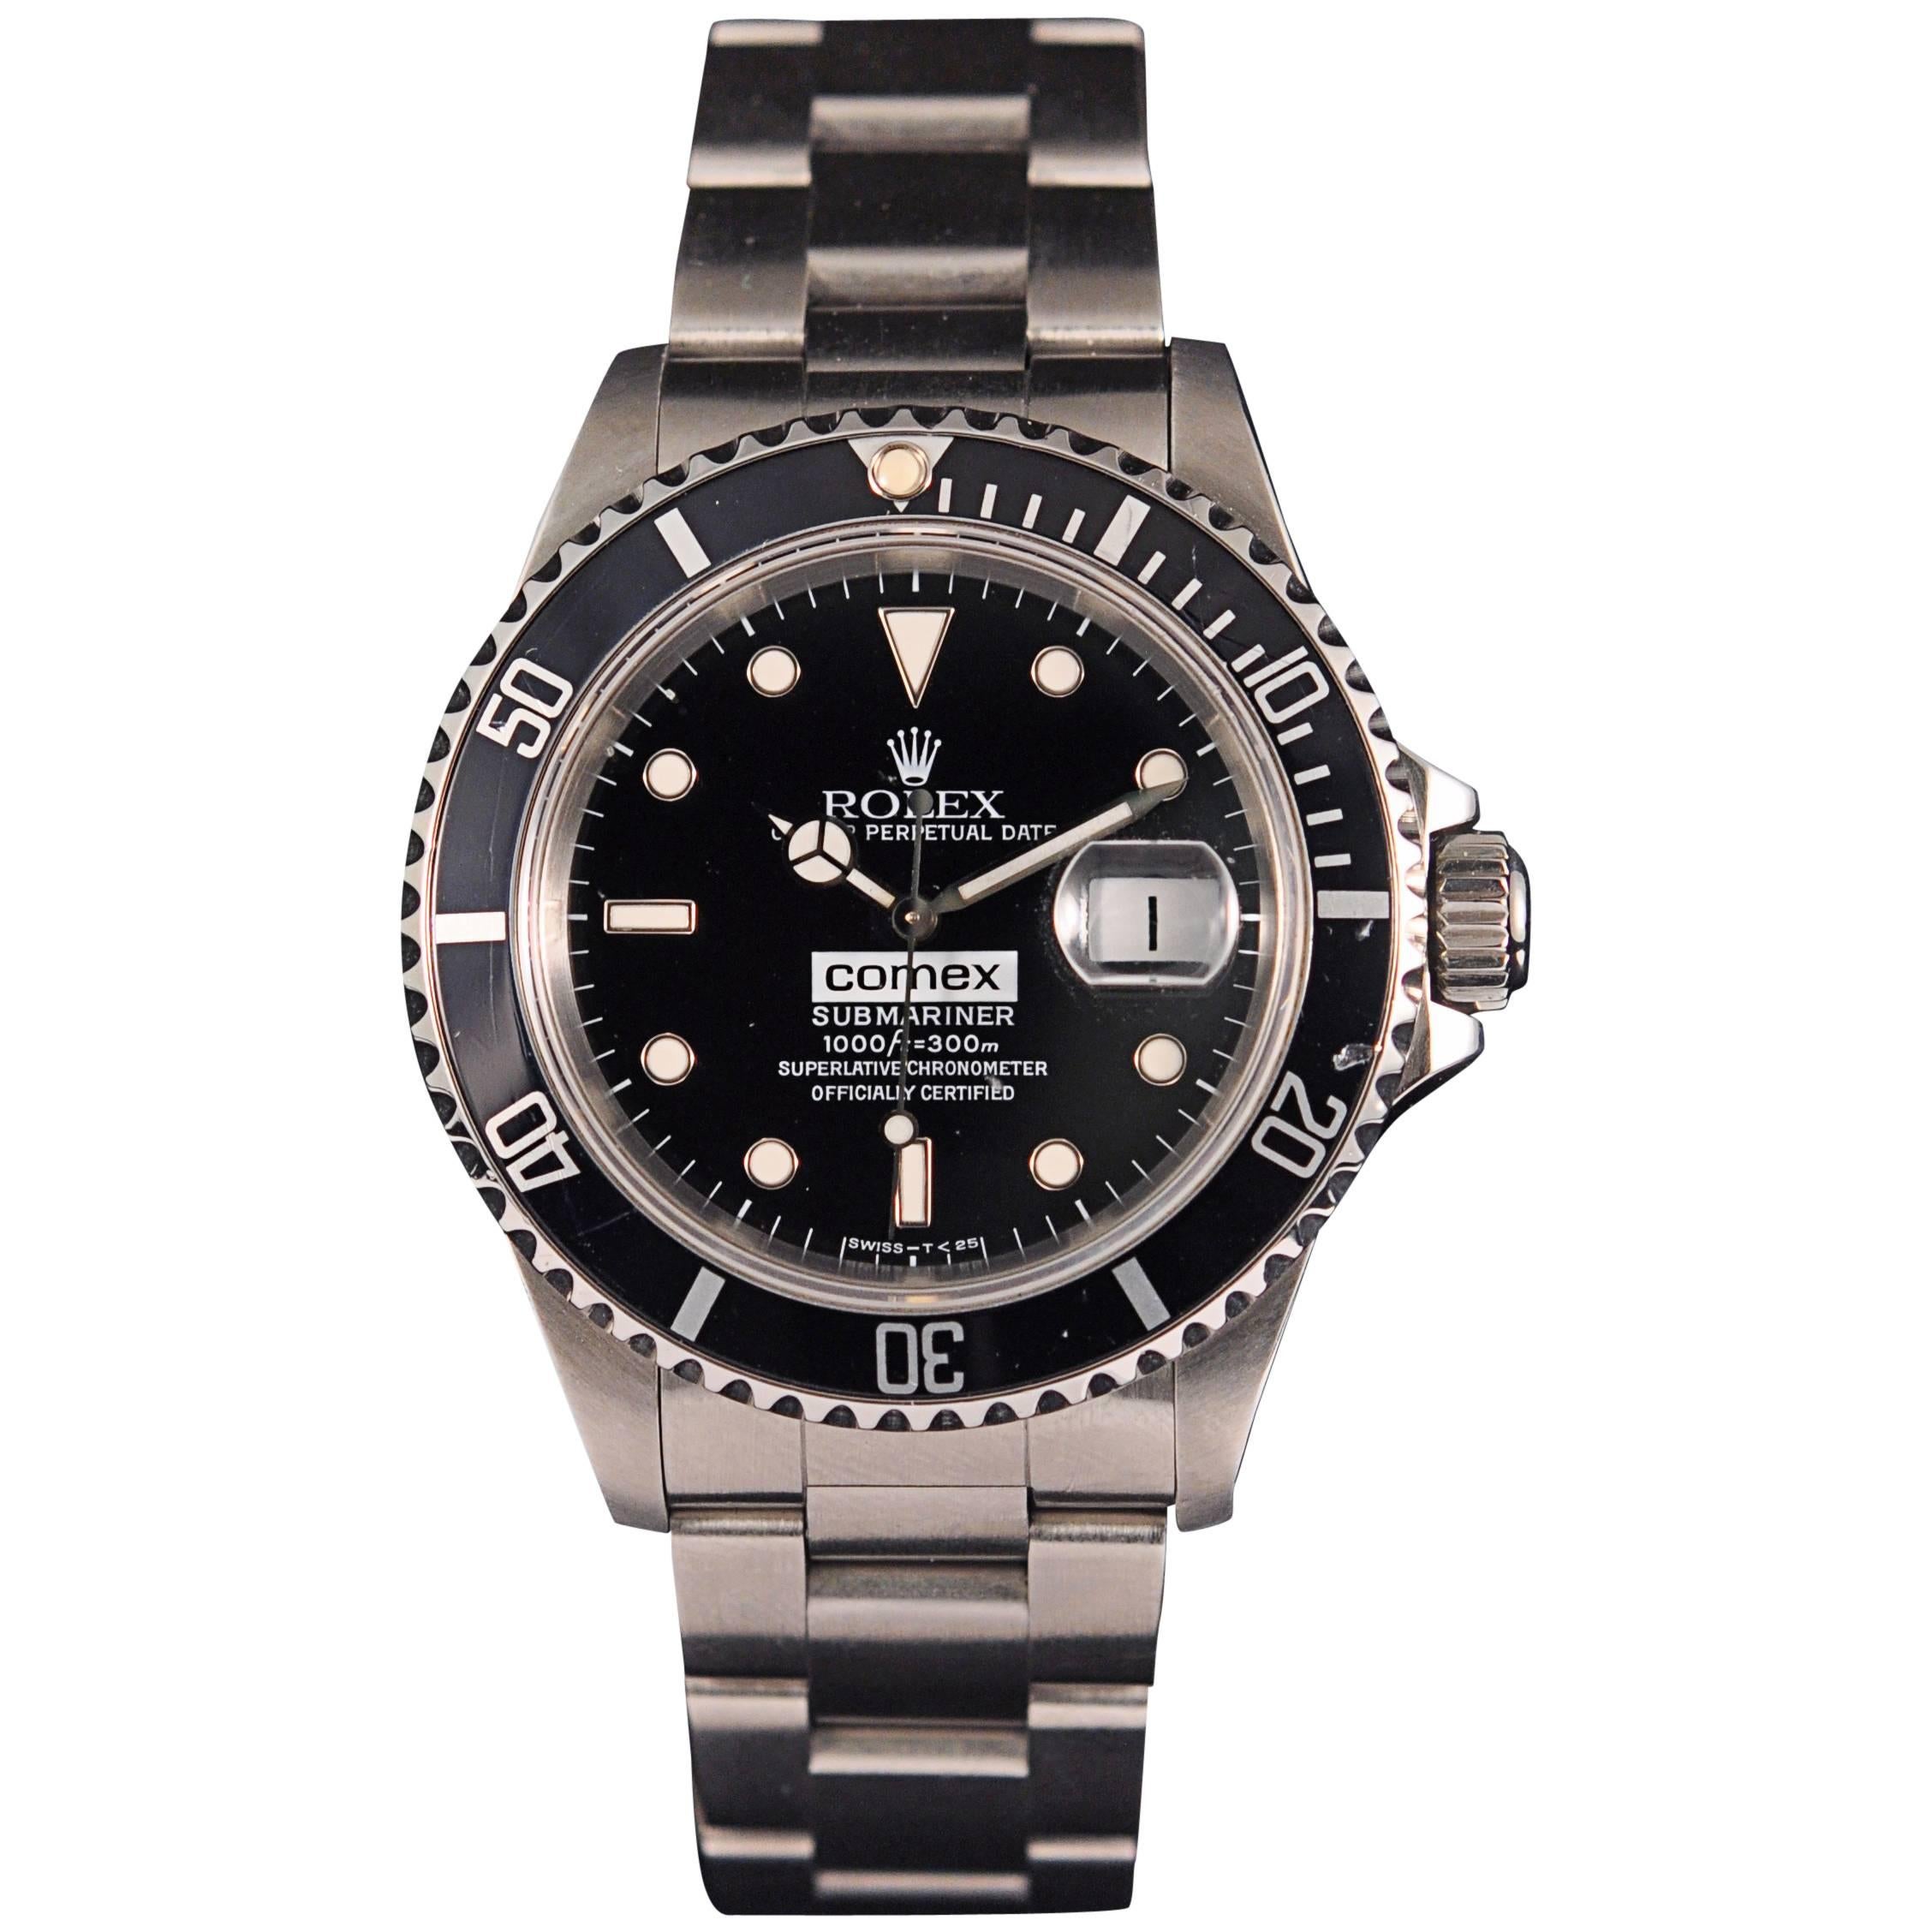 Rolex Stainless Steel Submariner Comex Diver's Wristwatch Ref 16610  For Sale